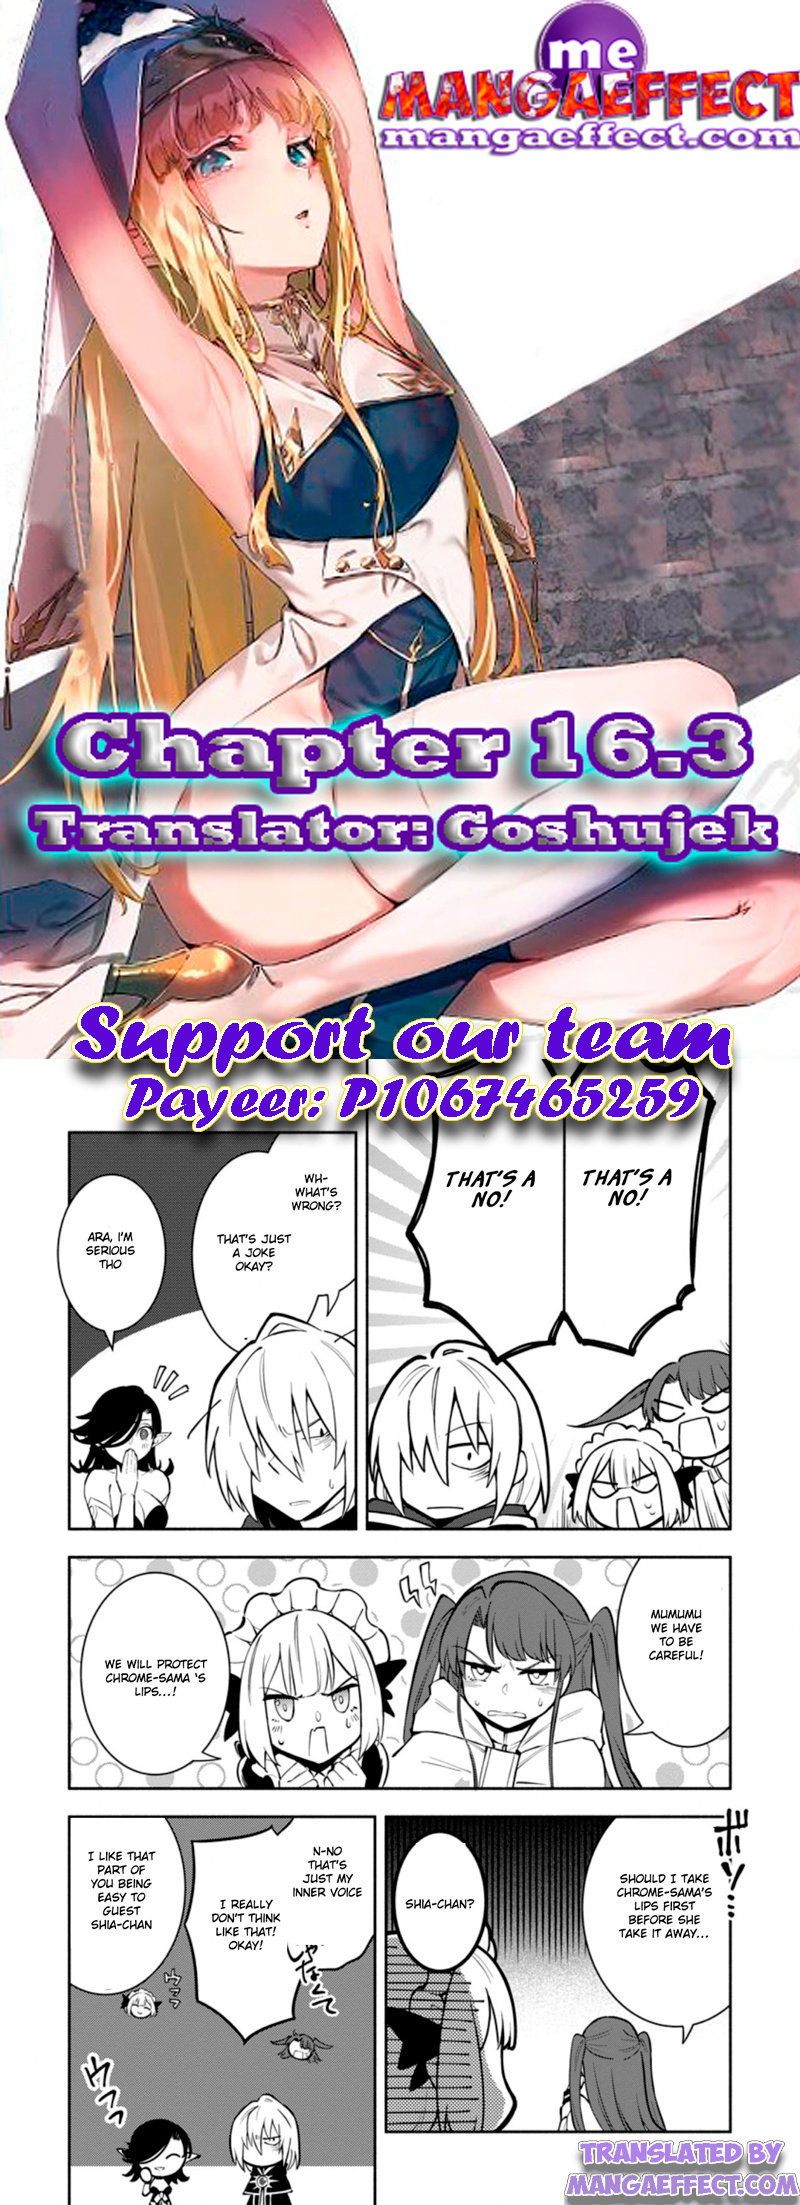 Chapter 16.3